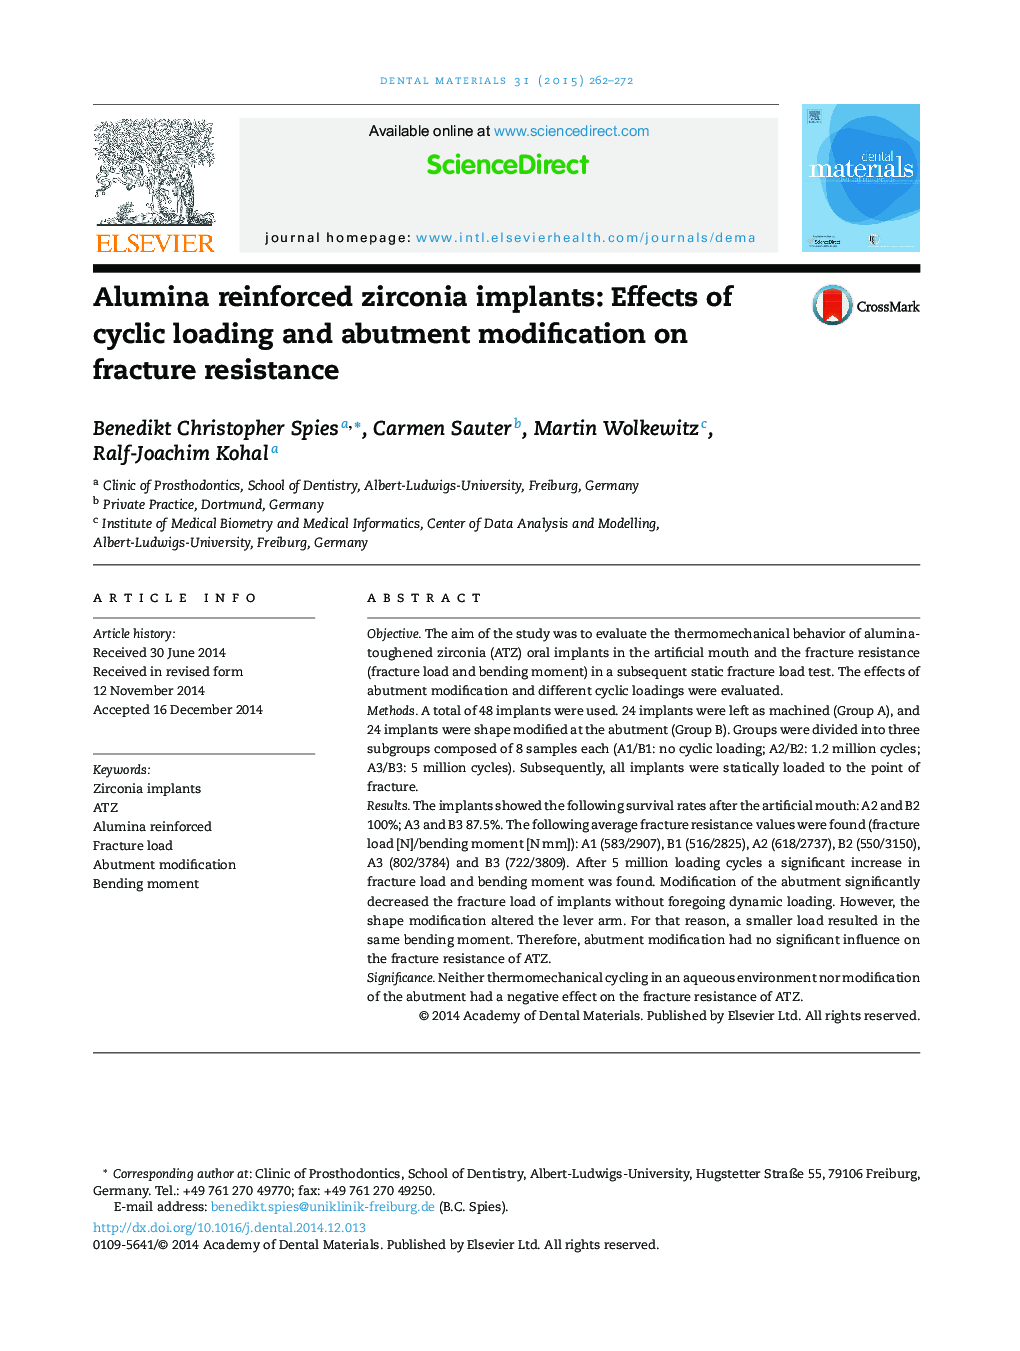 Alumina reinforced zirconia implants: Effects of cyclic loading and abutment modification on fracture resistance